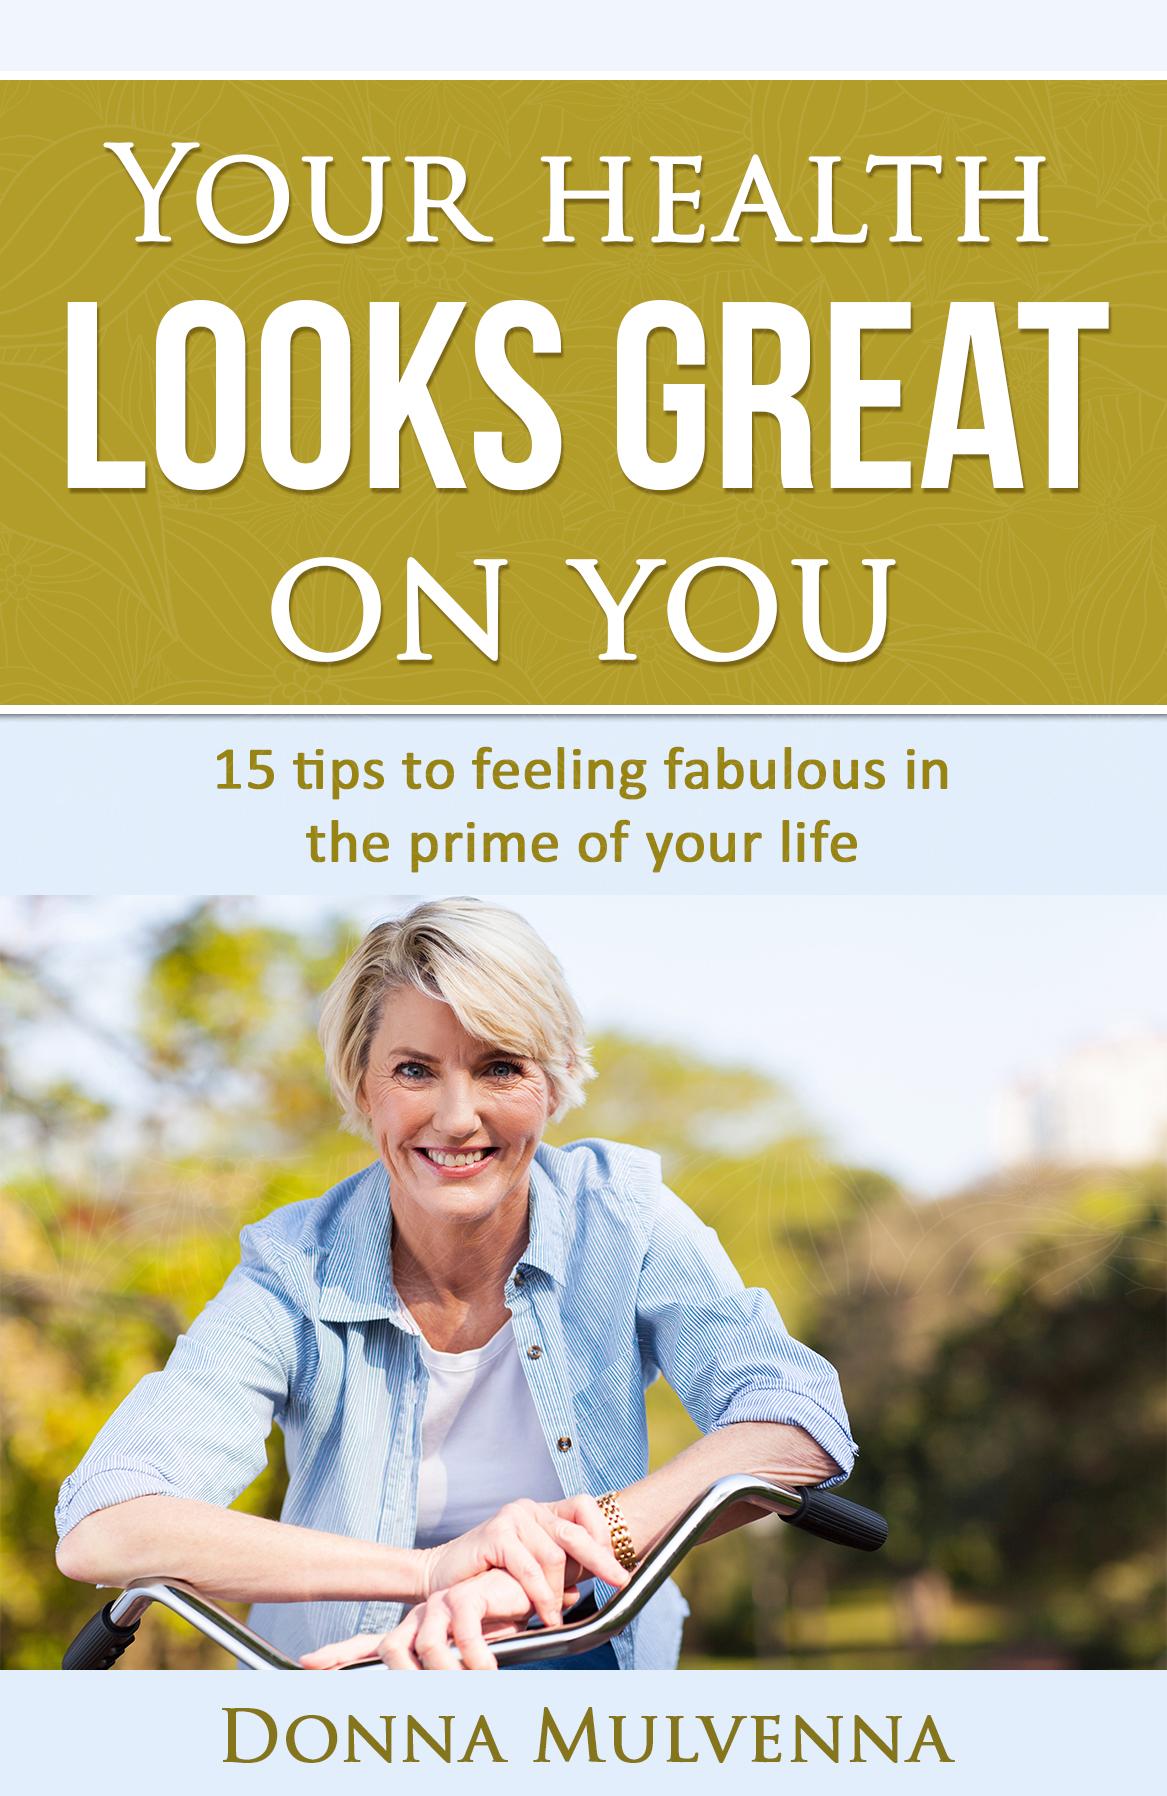 FREE: Your health looks great on you – 15 tips to feeling fabulous in the prime of your life by Donna Mulvenna